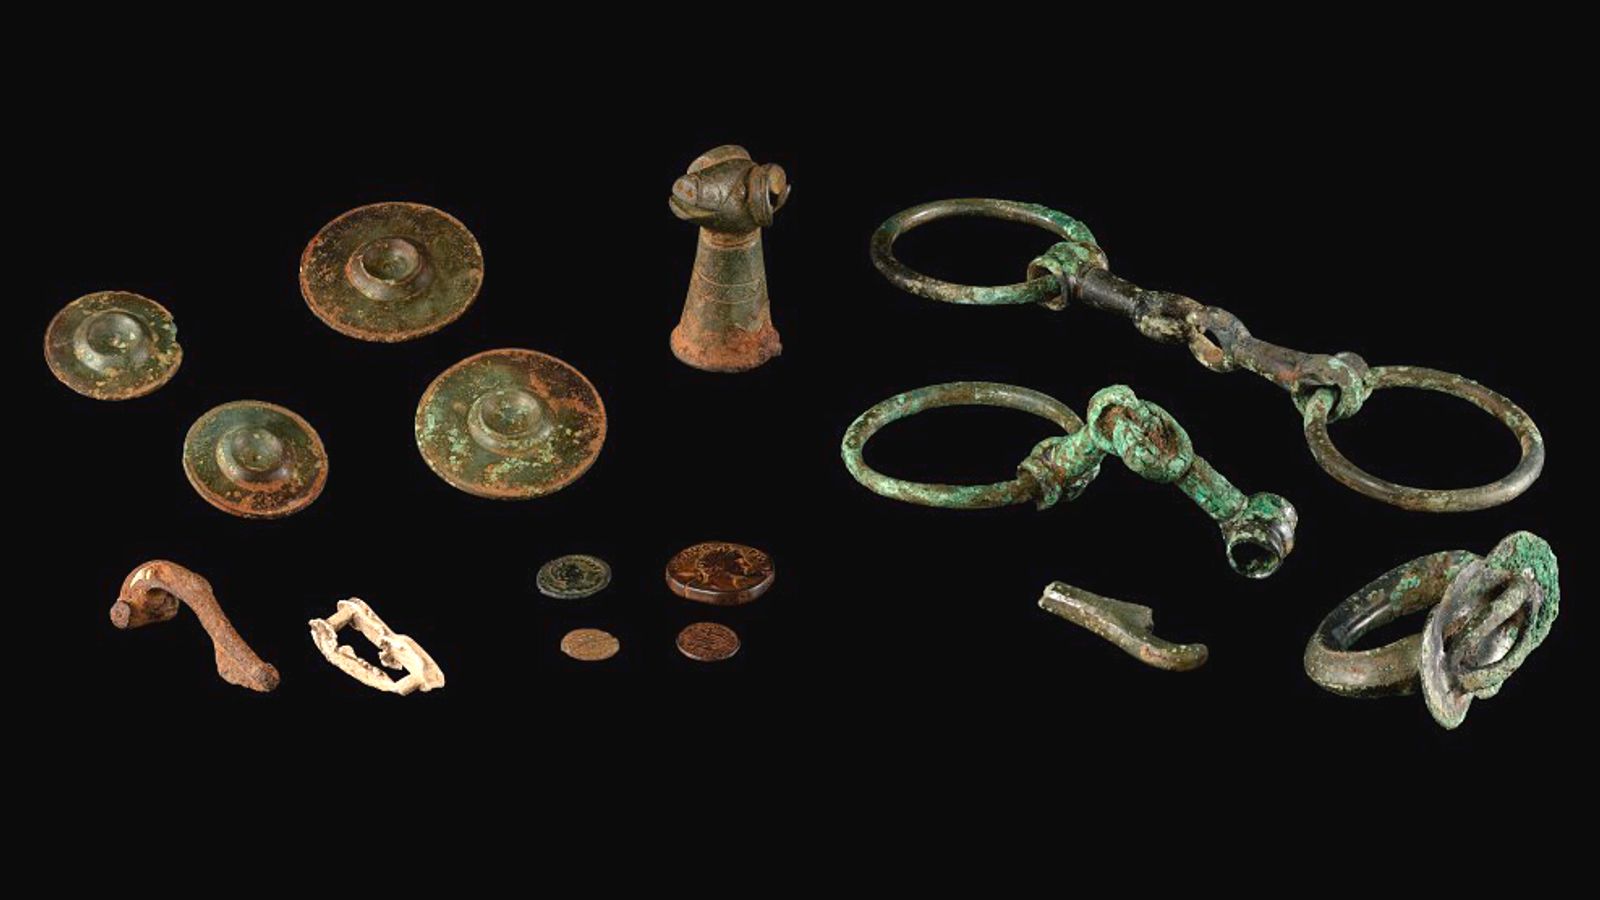 iron age and roman objects declared treasure after being found in 'boggy' field